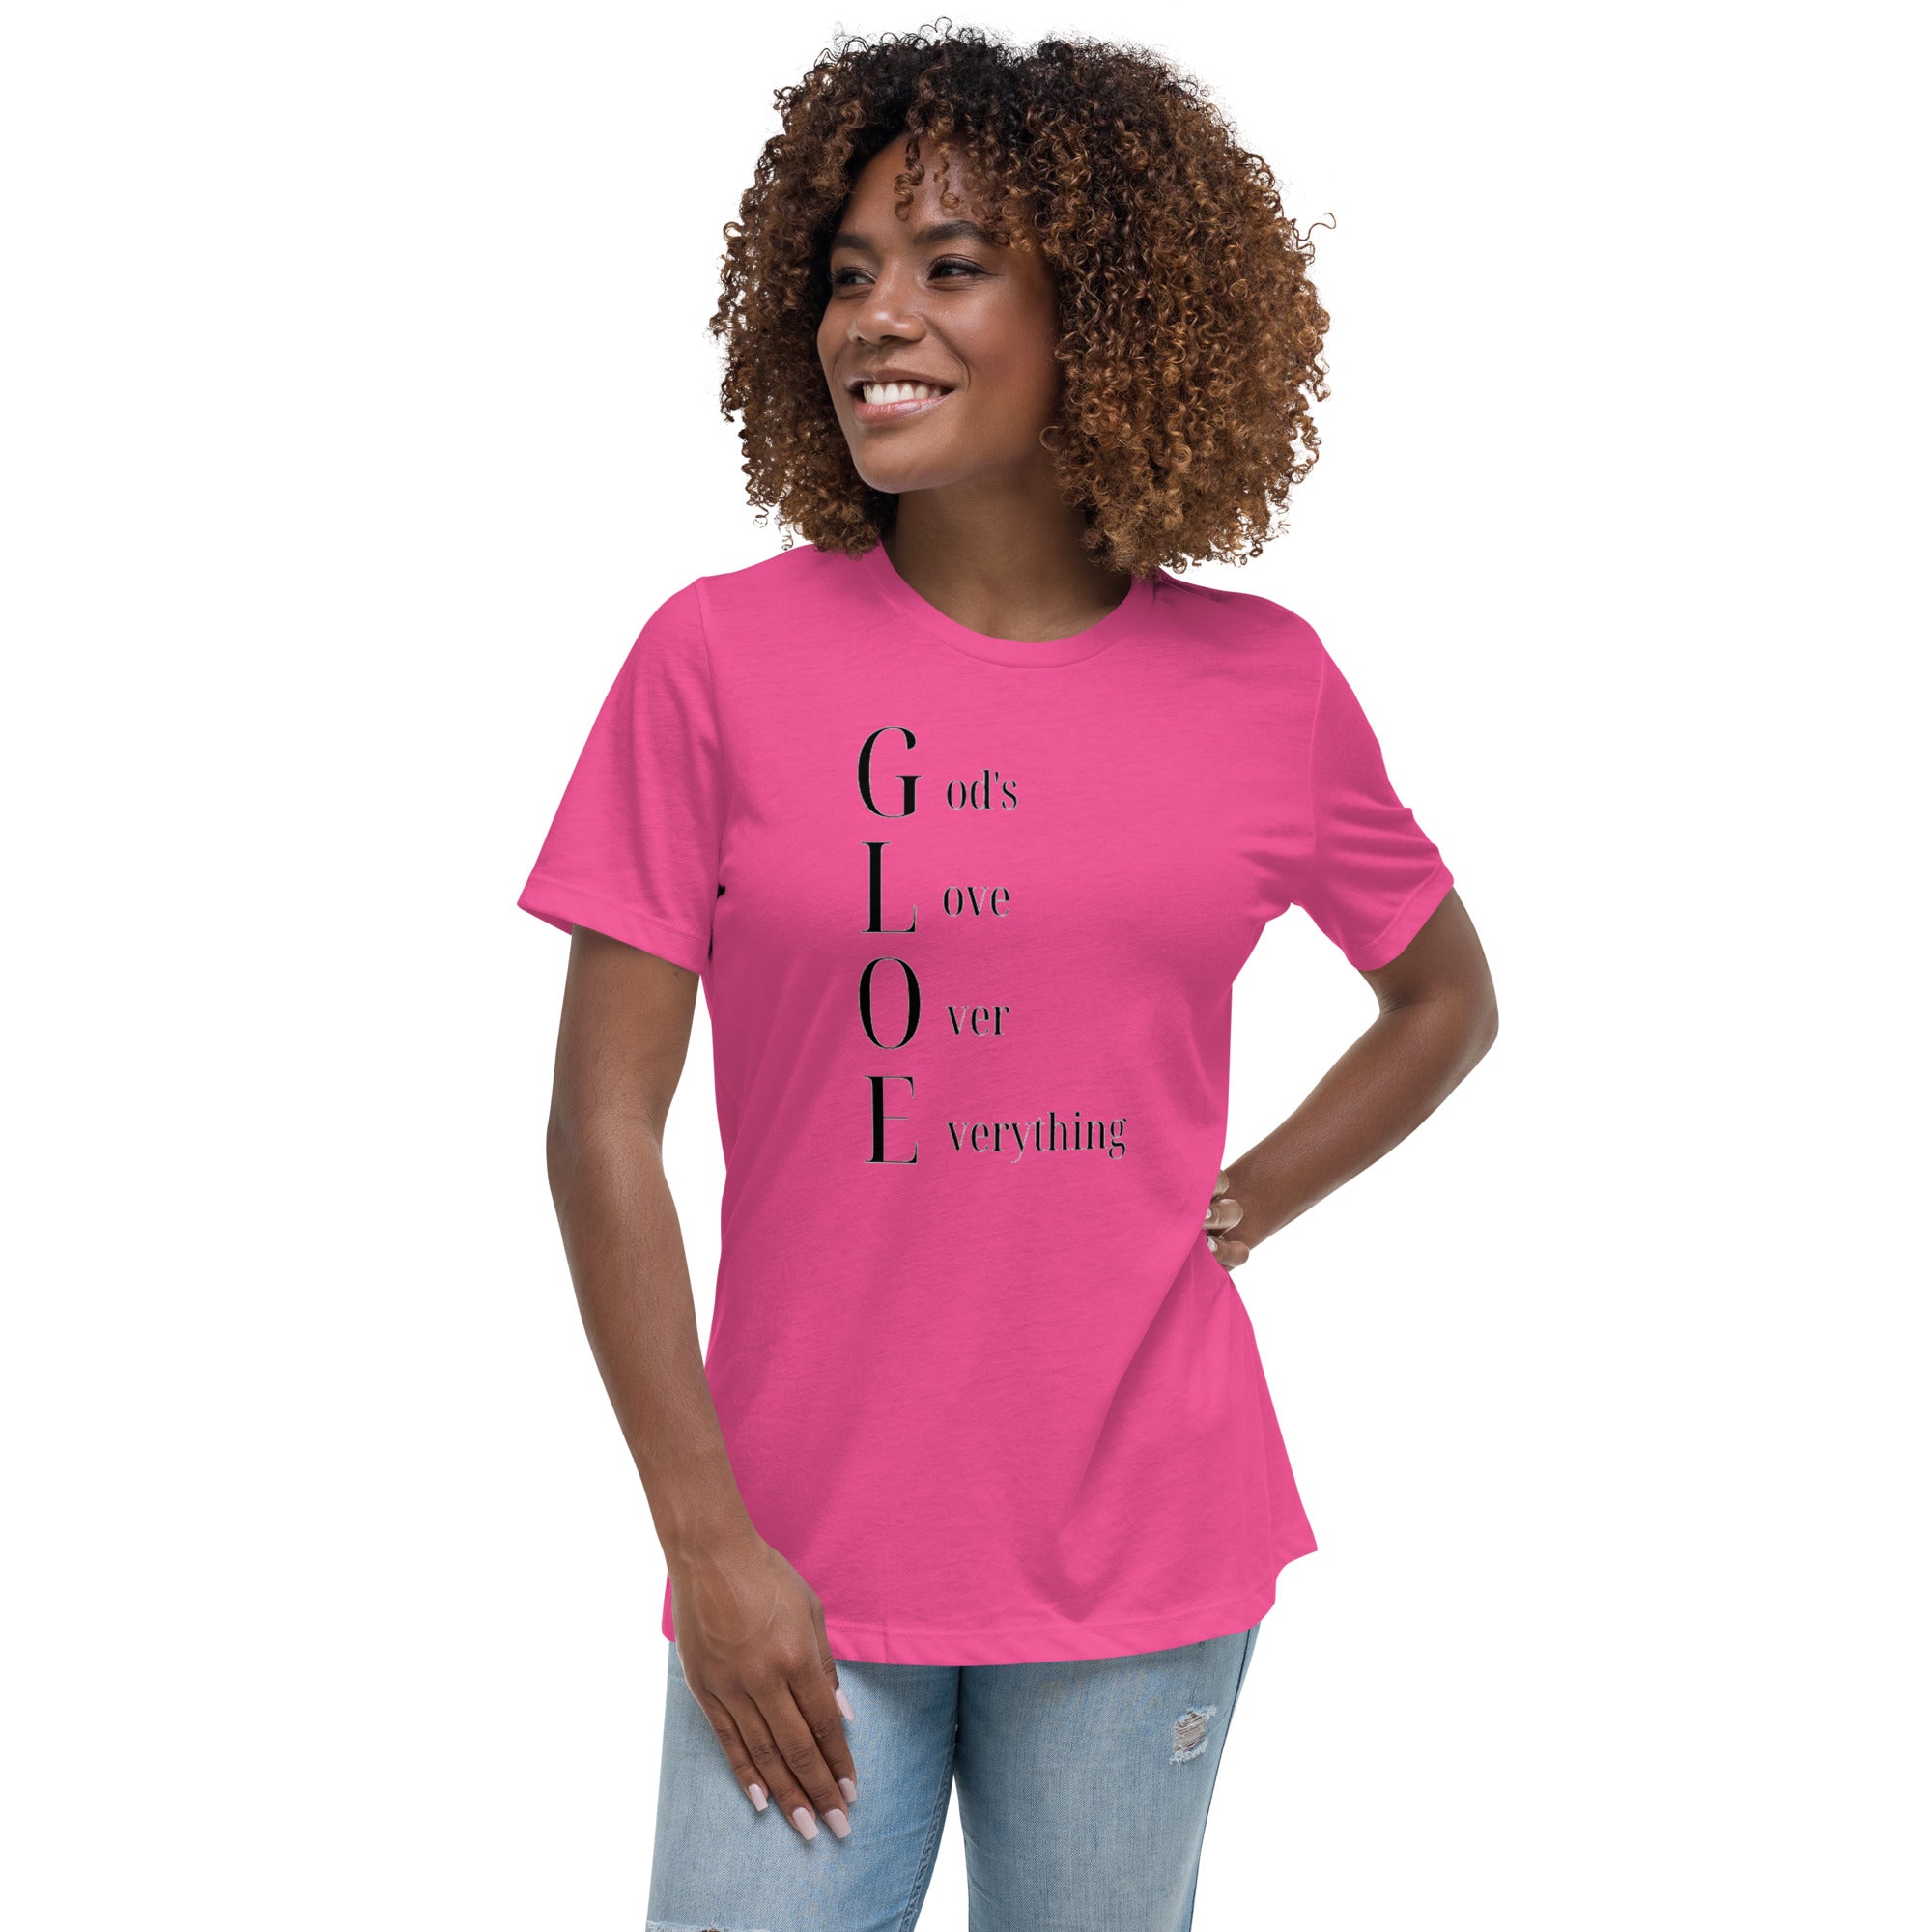 God's Love Over Everything T-Shirt